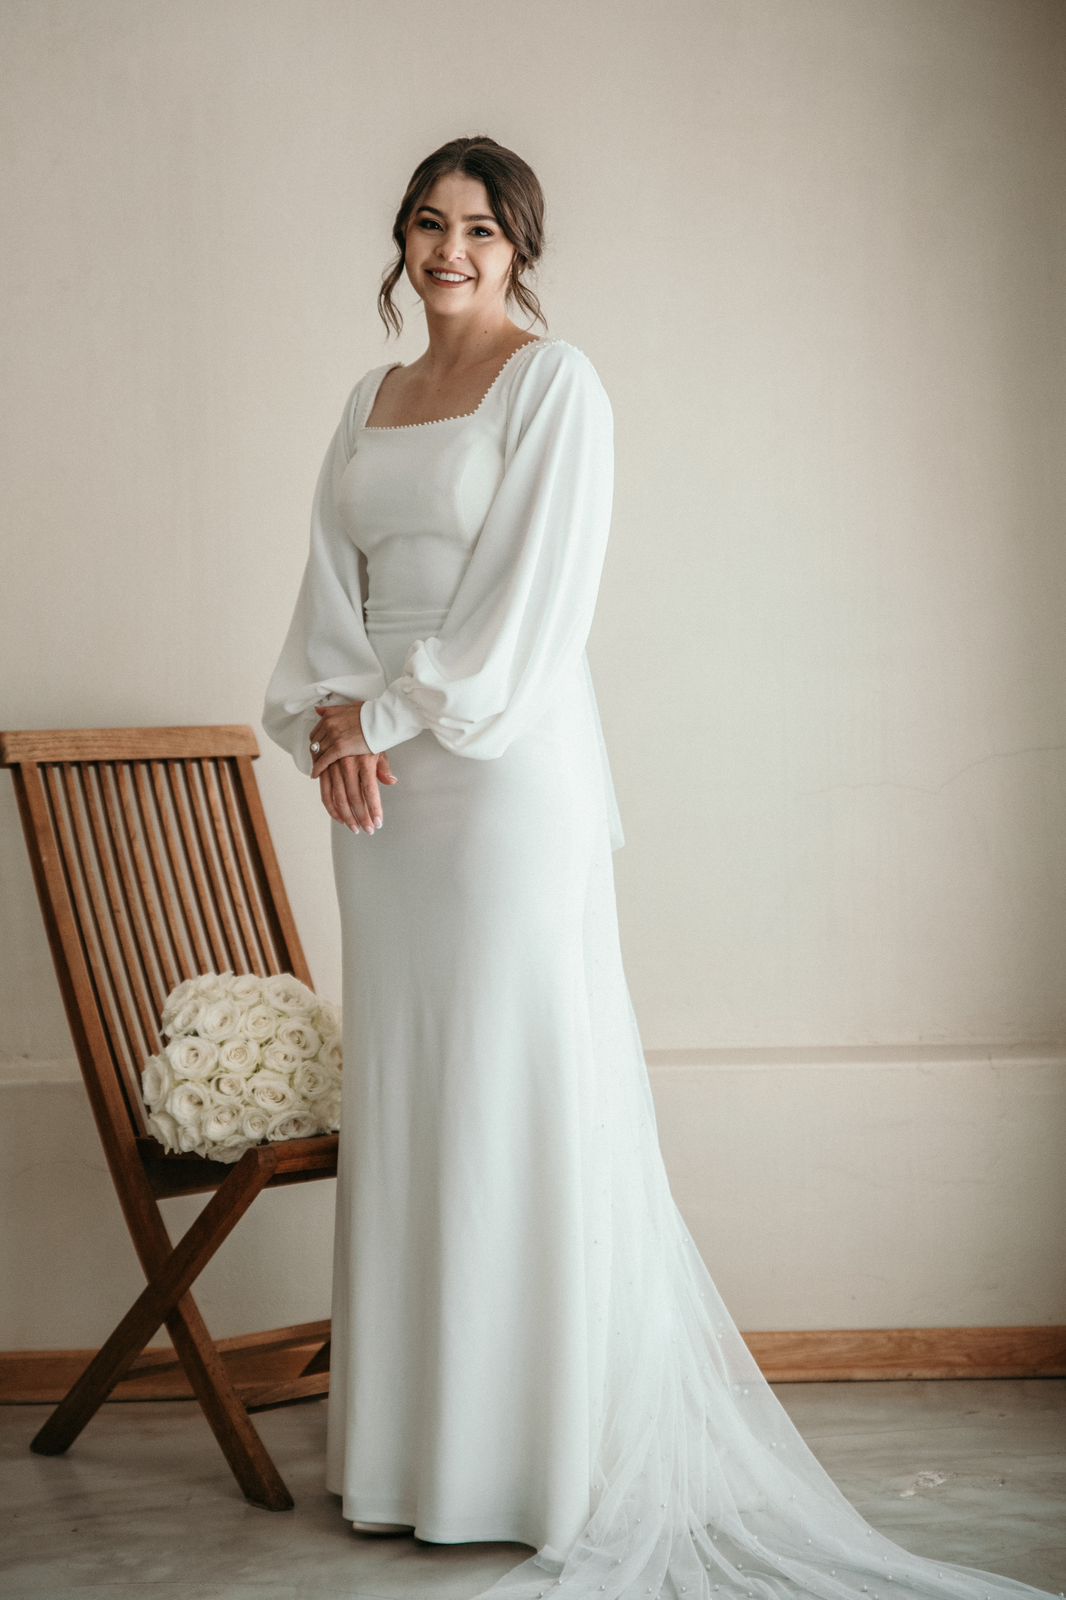 SIAN - A mermaid-style bridal gown made of crepe, showcasing a square neckline and elegant bishop sleeves.